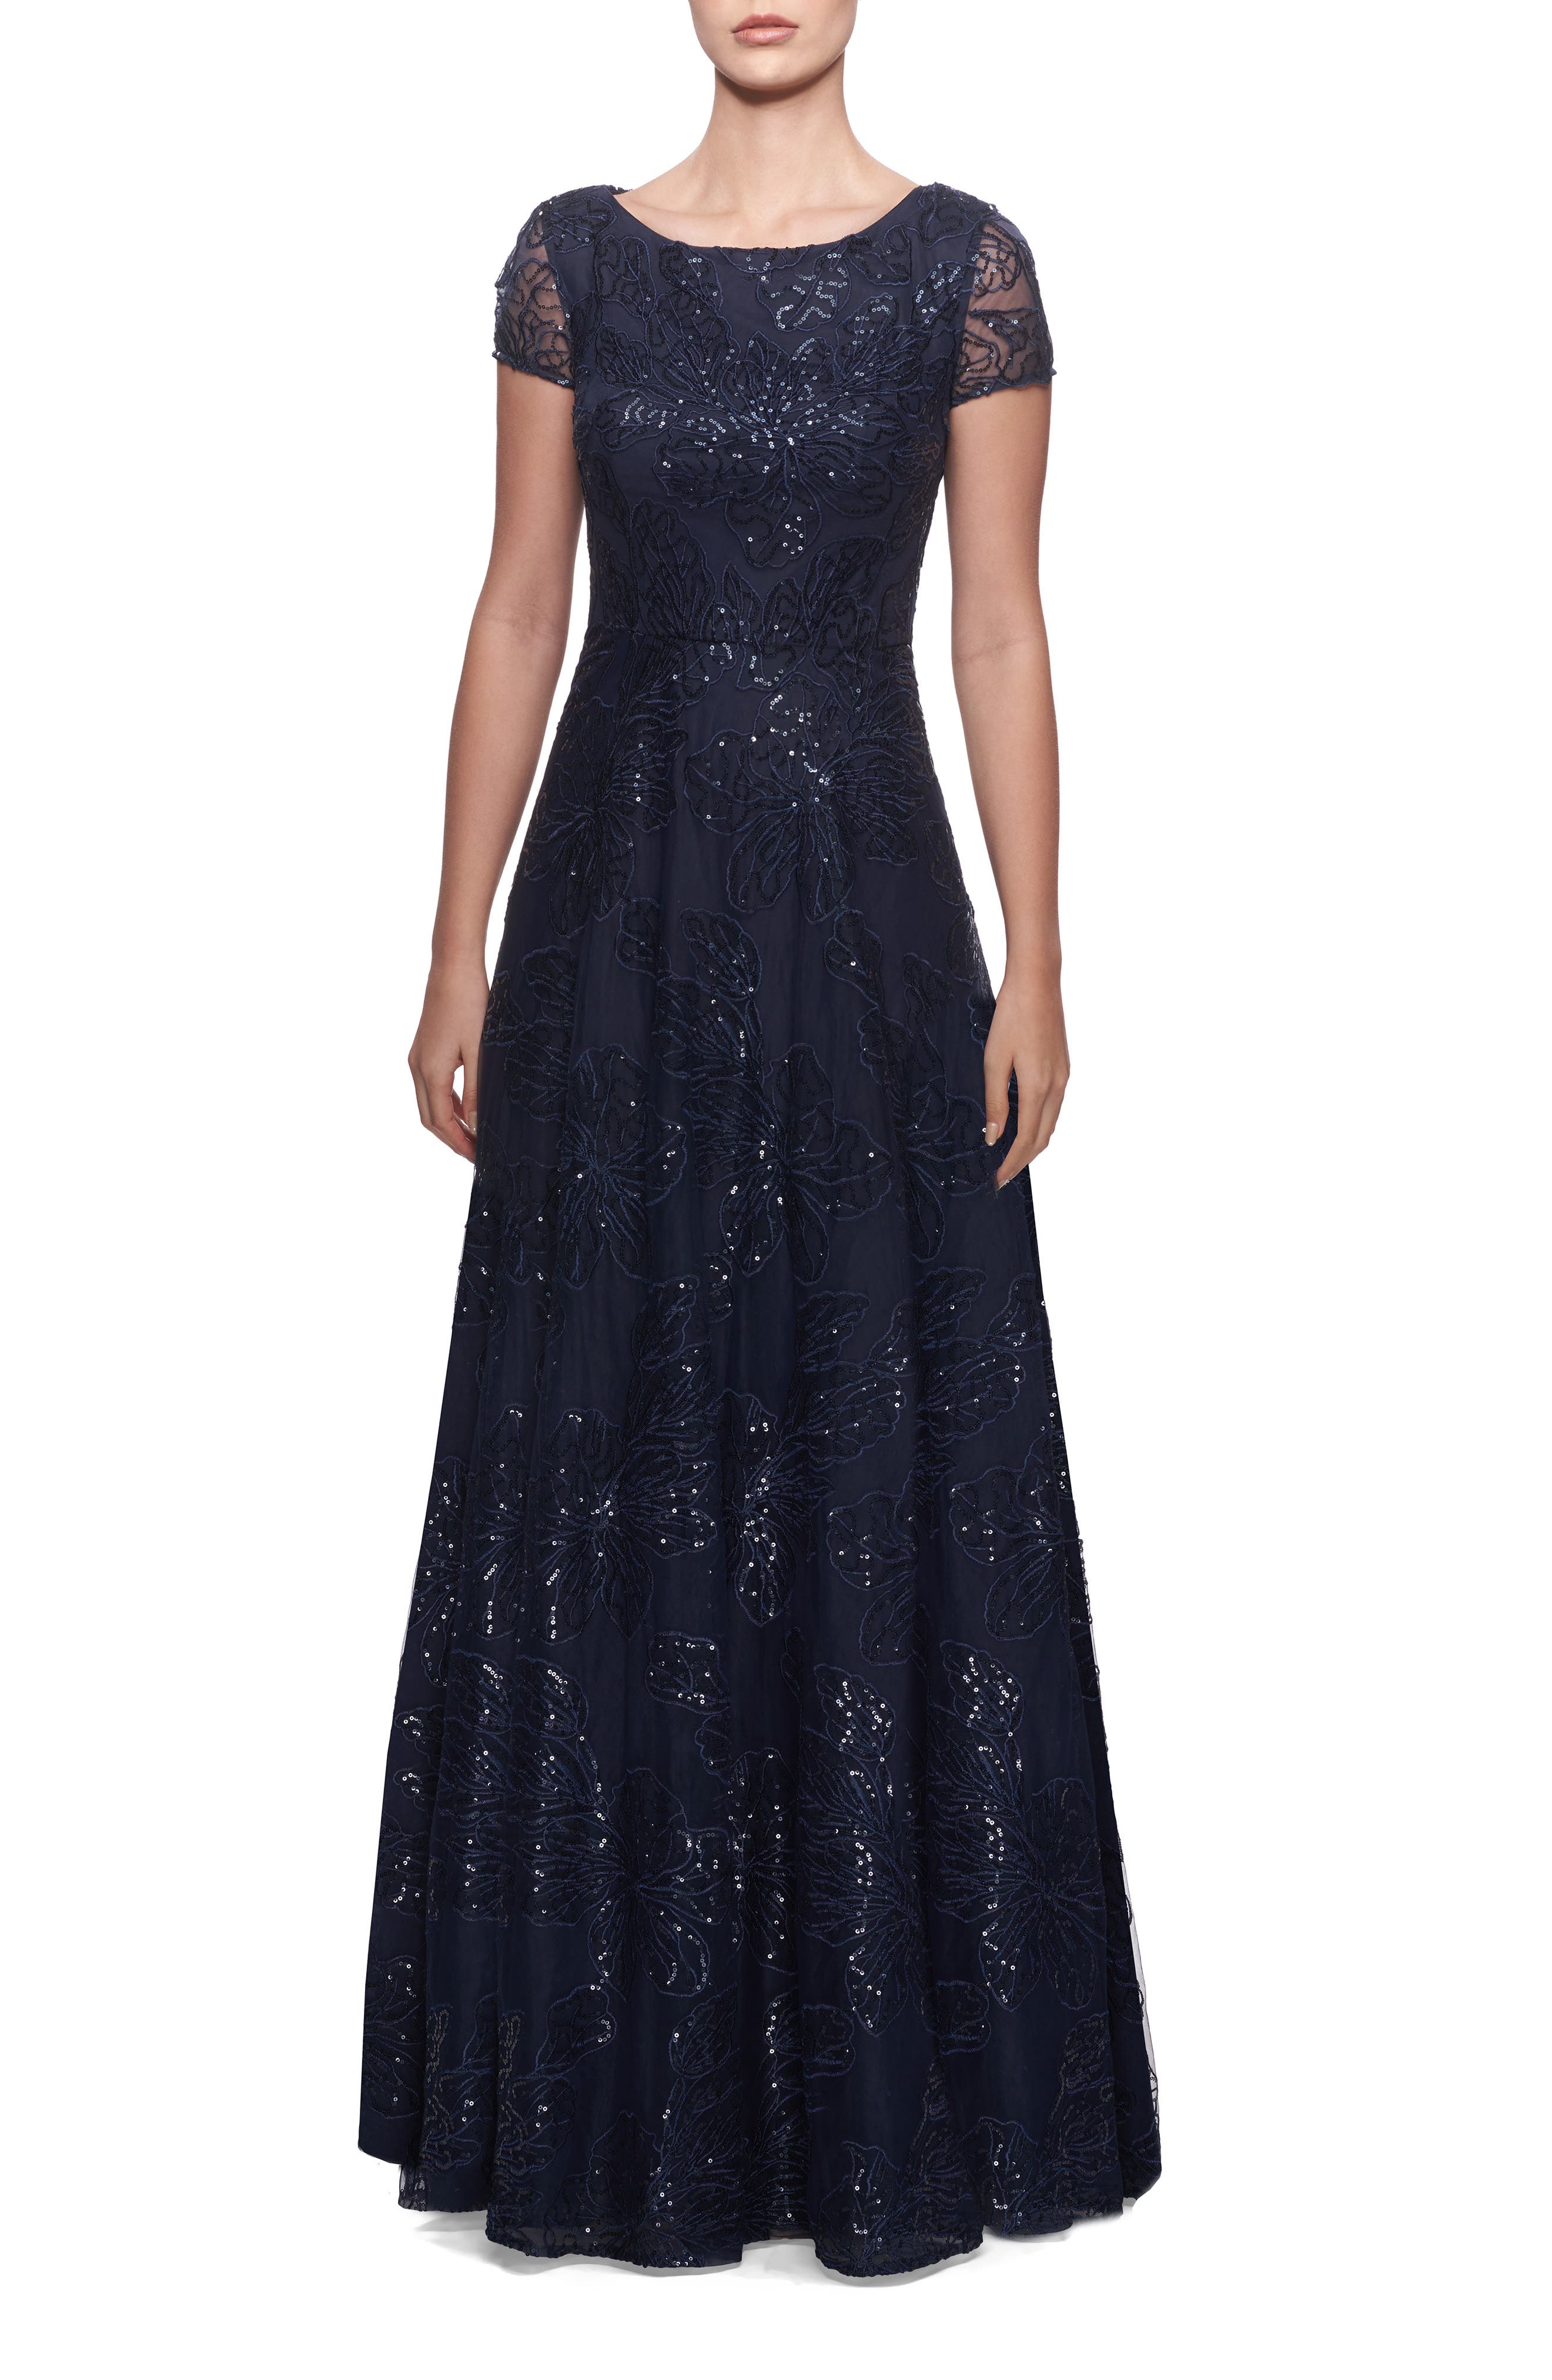 LA FEMME SEQUIN FLORAL EMBROIDERED GOWN,849667089351